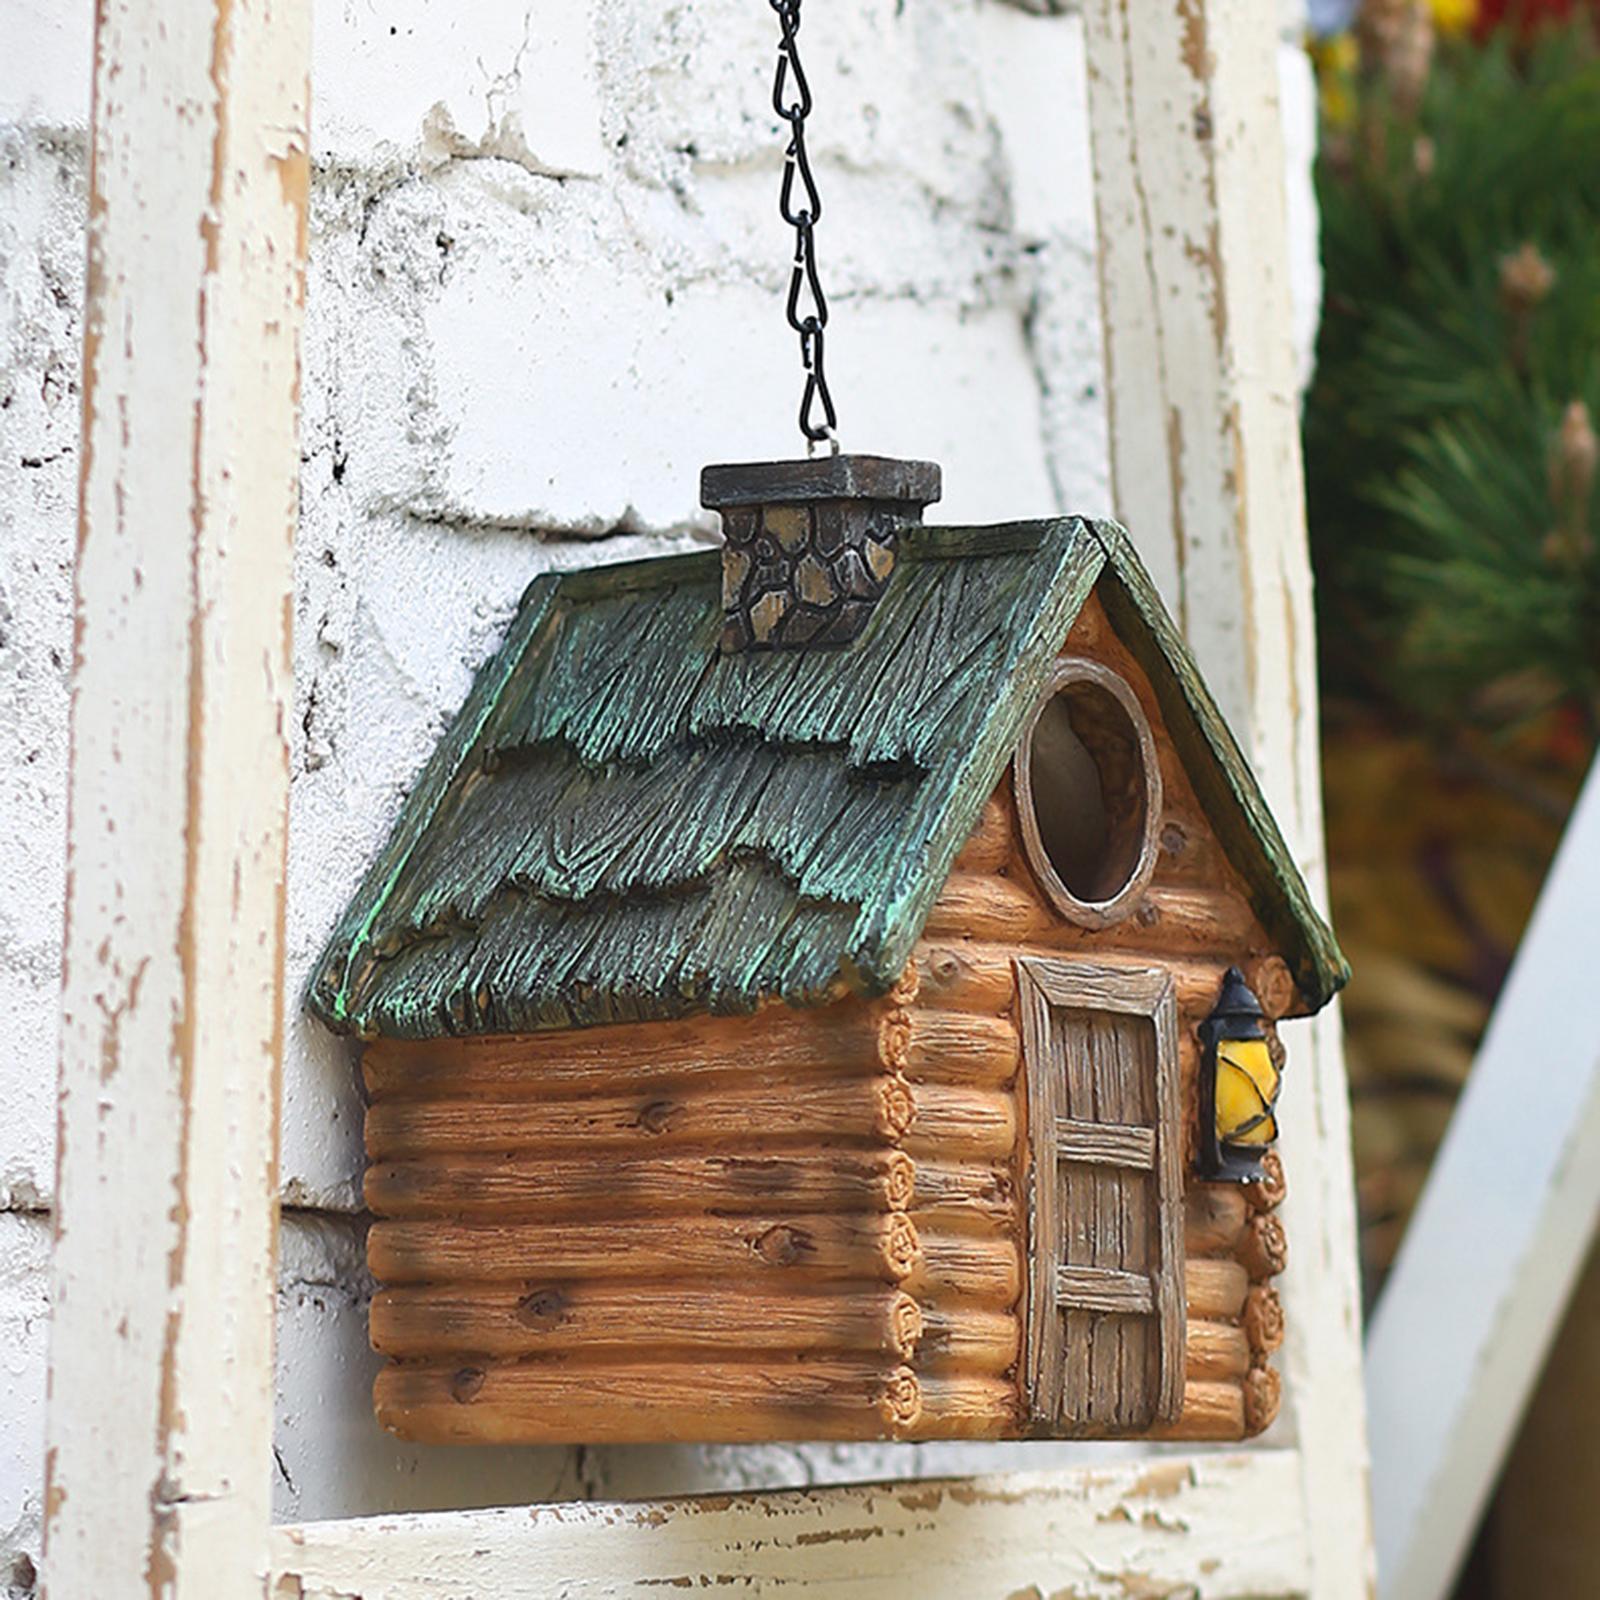 Birdhouses Shelter for Cardinal Bluebird Bird Cages for Outdoor Lawn Trees